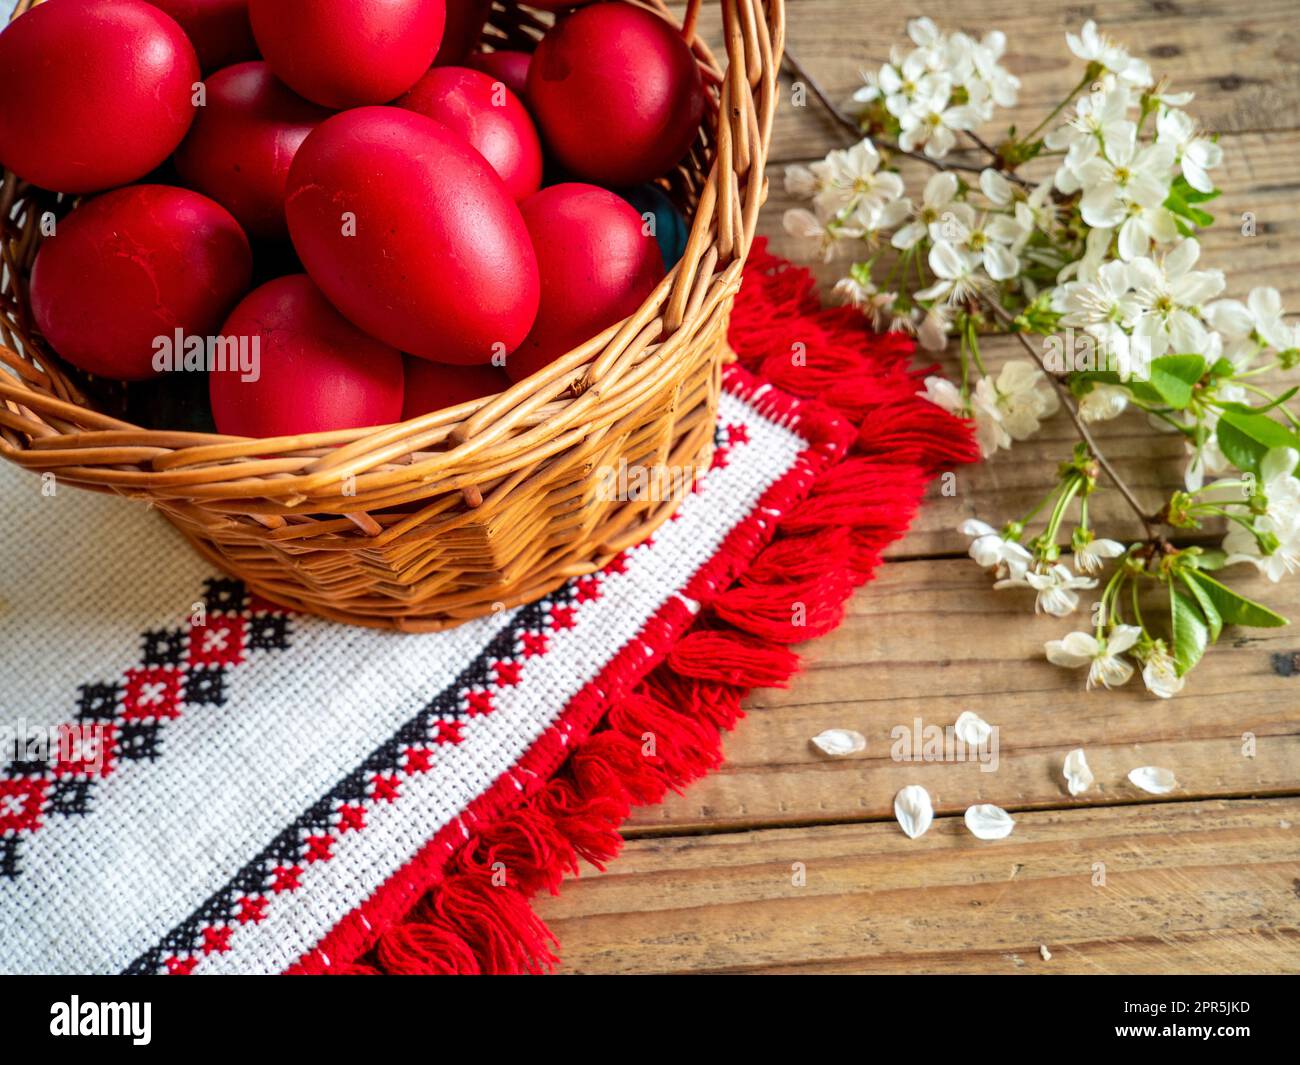 basket of red Easter eggs next to flowering branches on wooden table Stock Photo